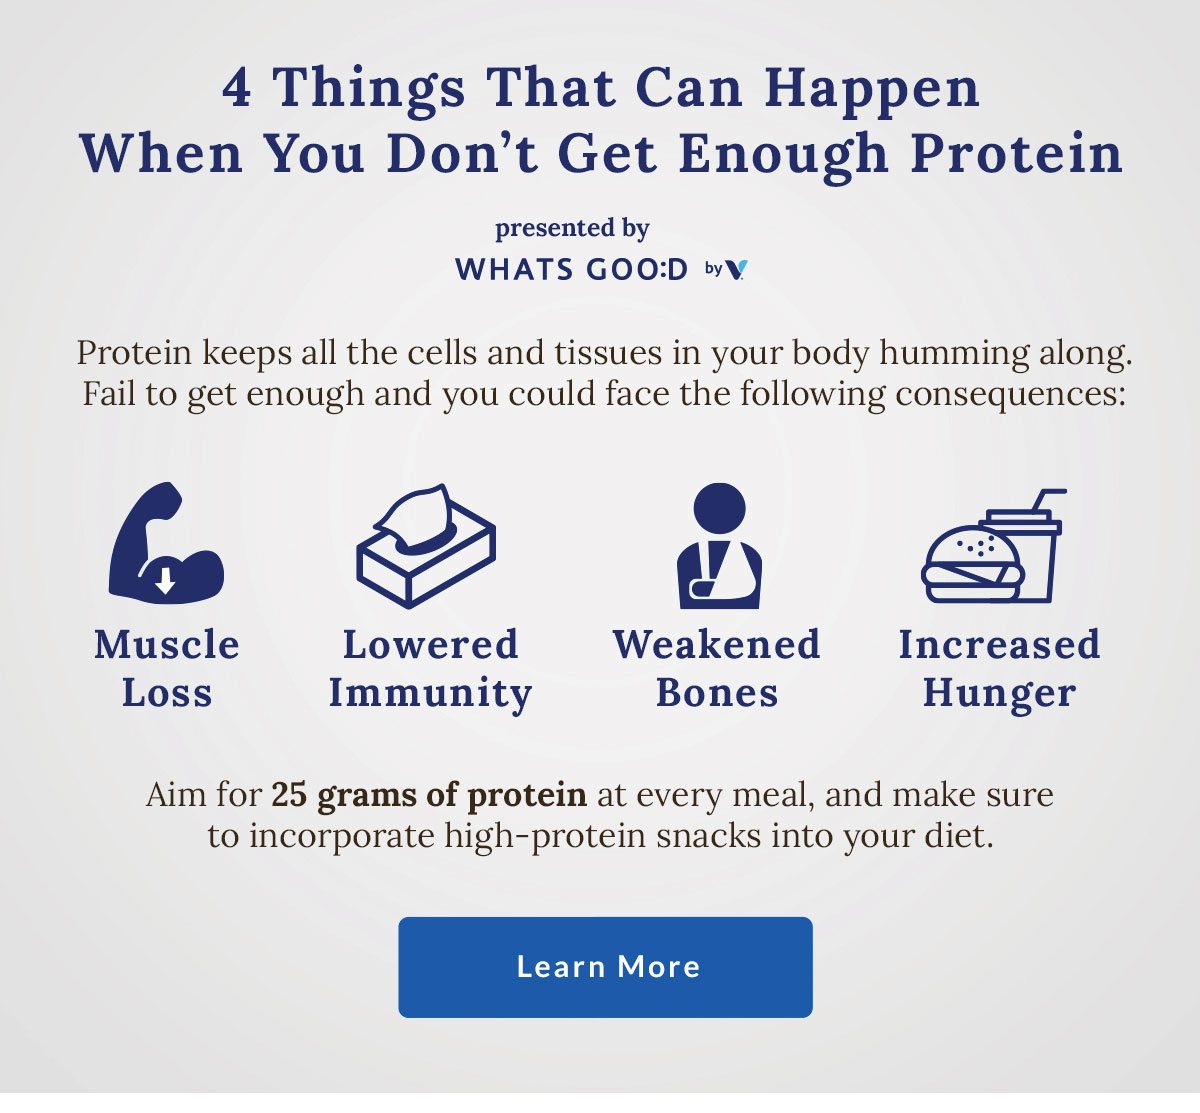 4 Things That Can Happen When You Don't Get Enough Protein | Learn More